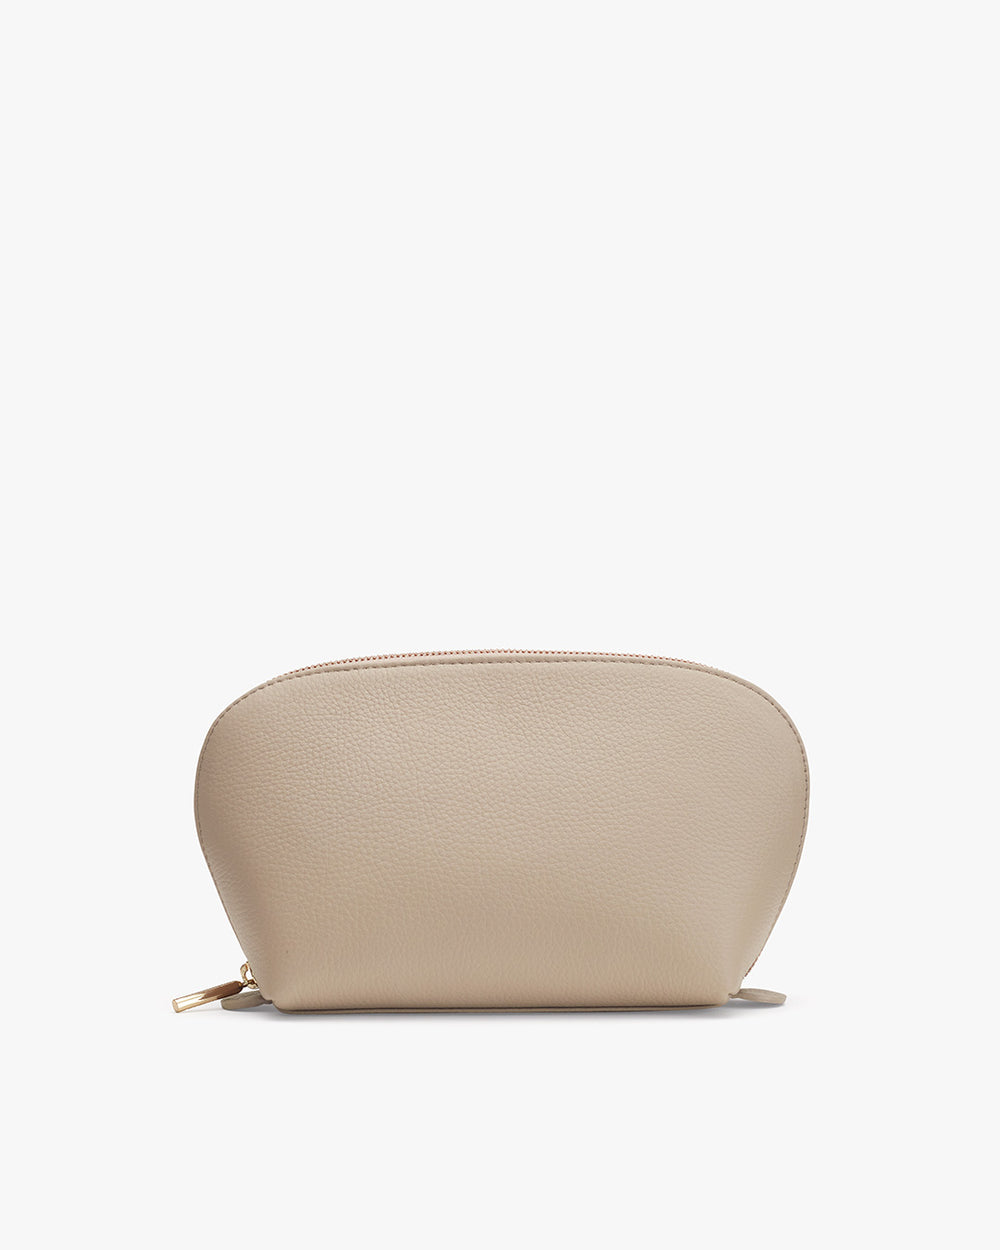 Closed zipper pouch standing upright with a smooth texture.